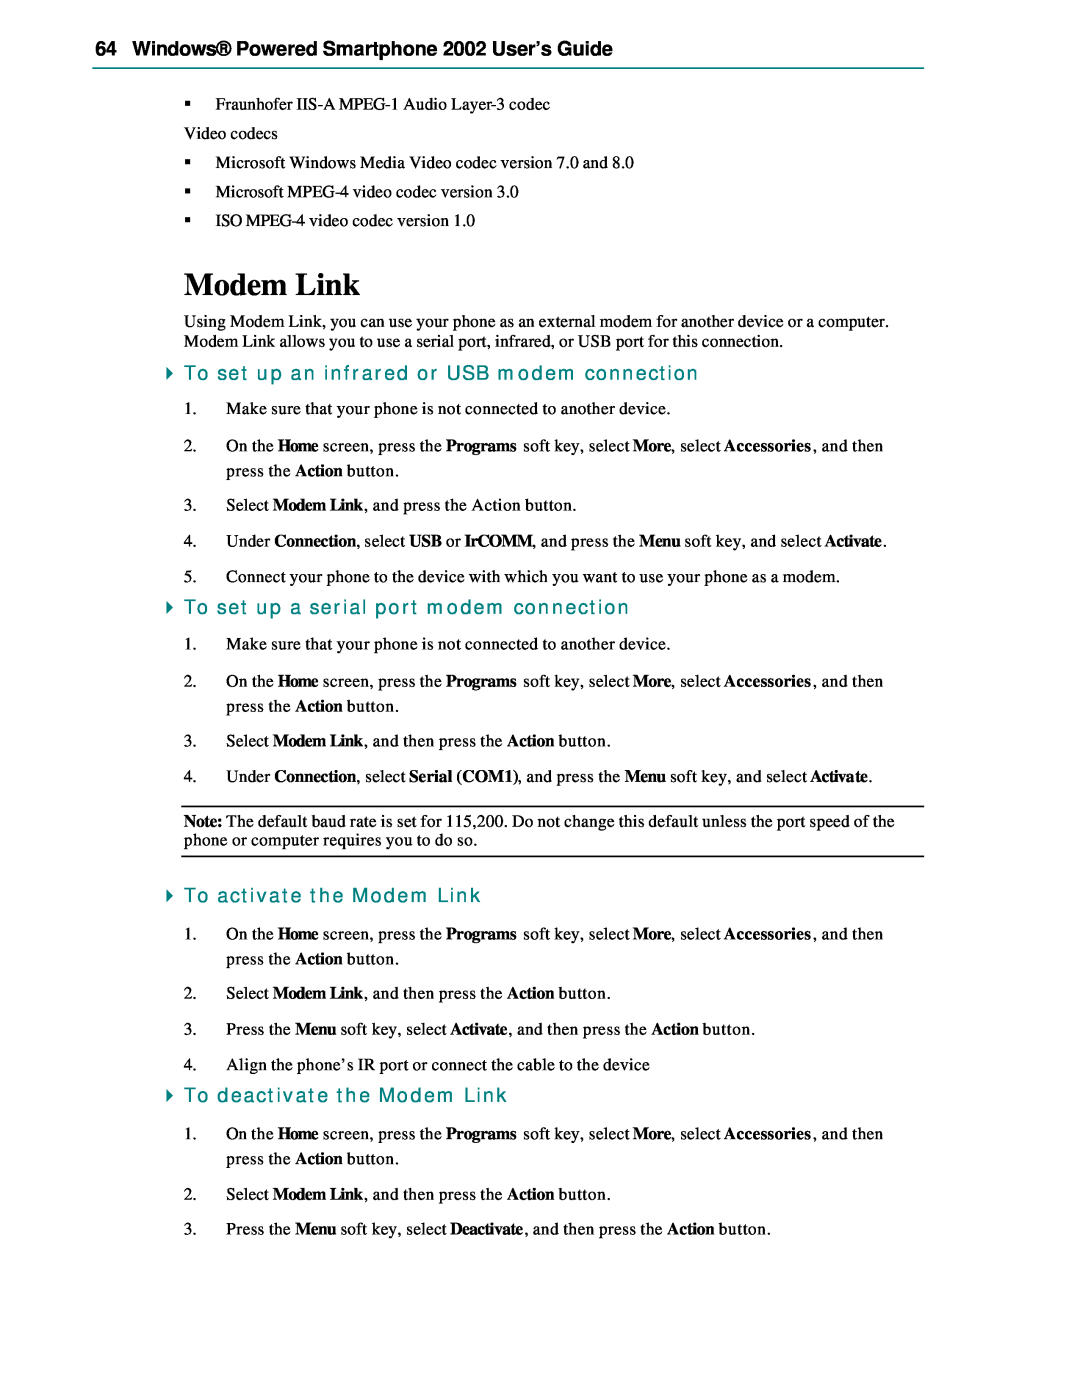 Microsoft manual Modem Link, Windows Powered Smartphone 2002 User’s Guide, To set up an infrared or USB modem connection 